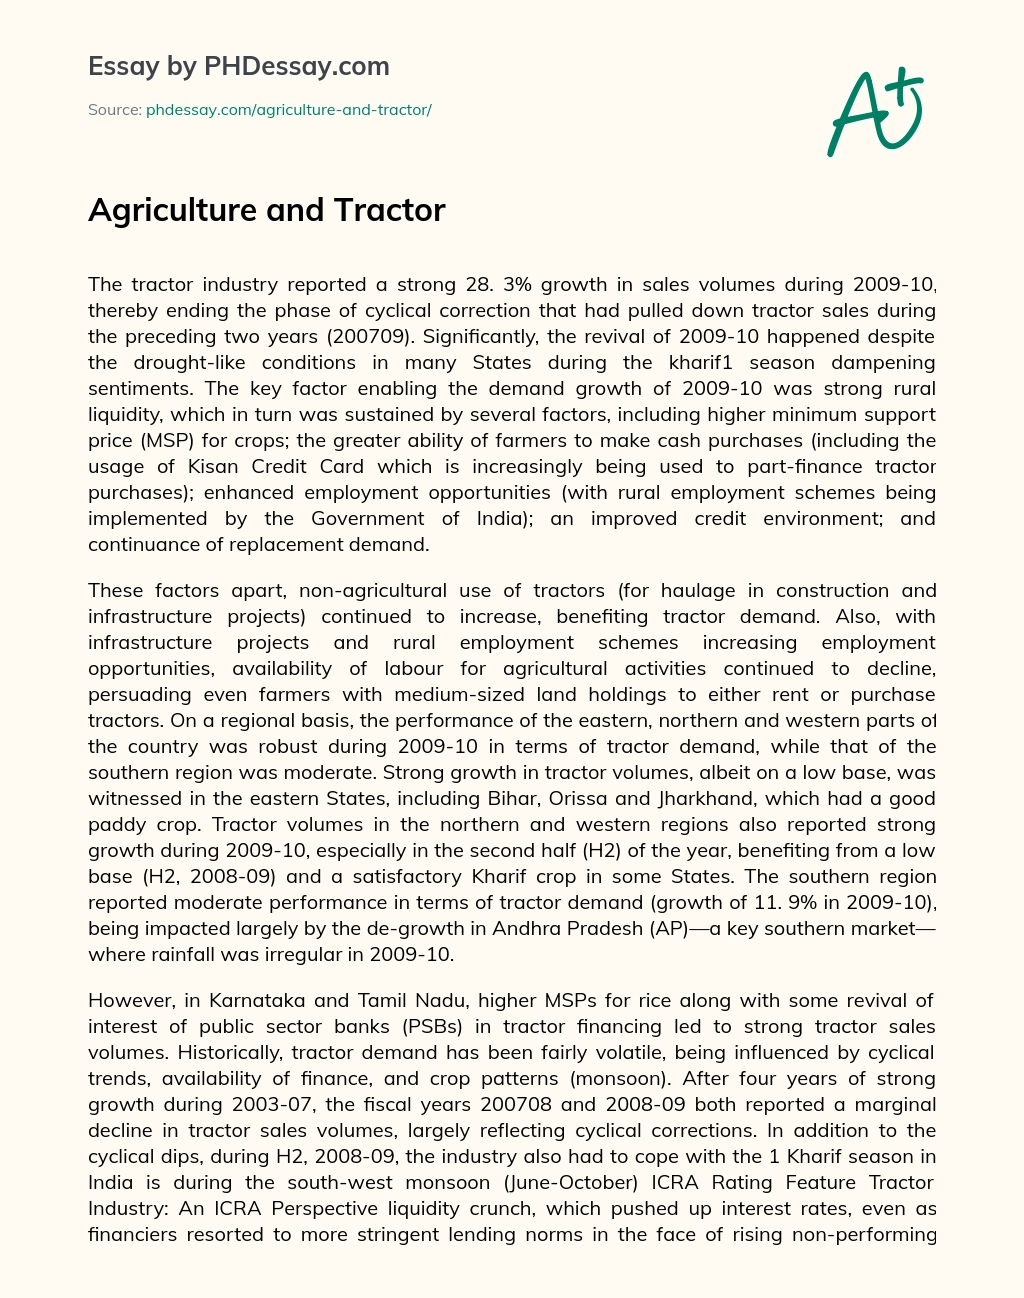 Agriculture and Tractor essay